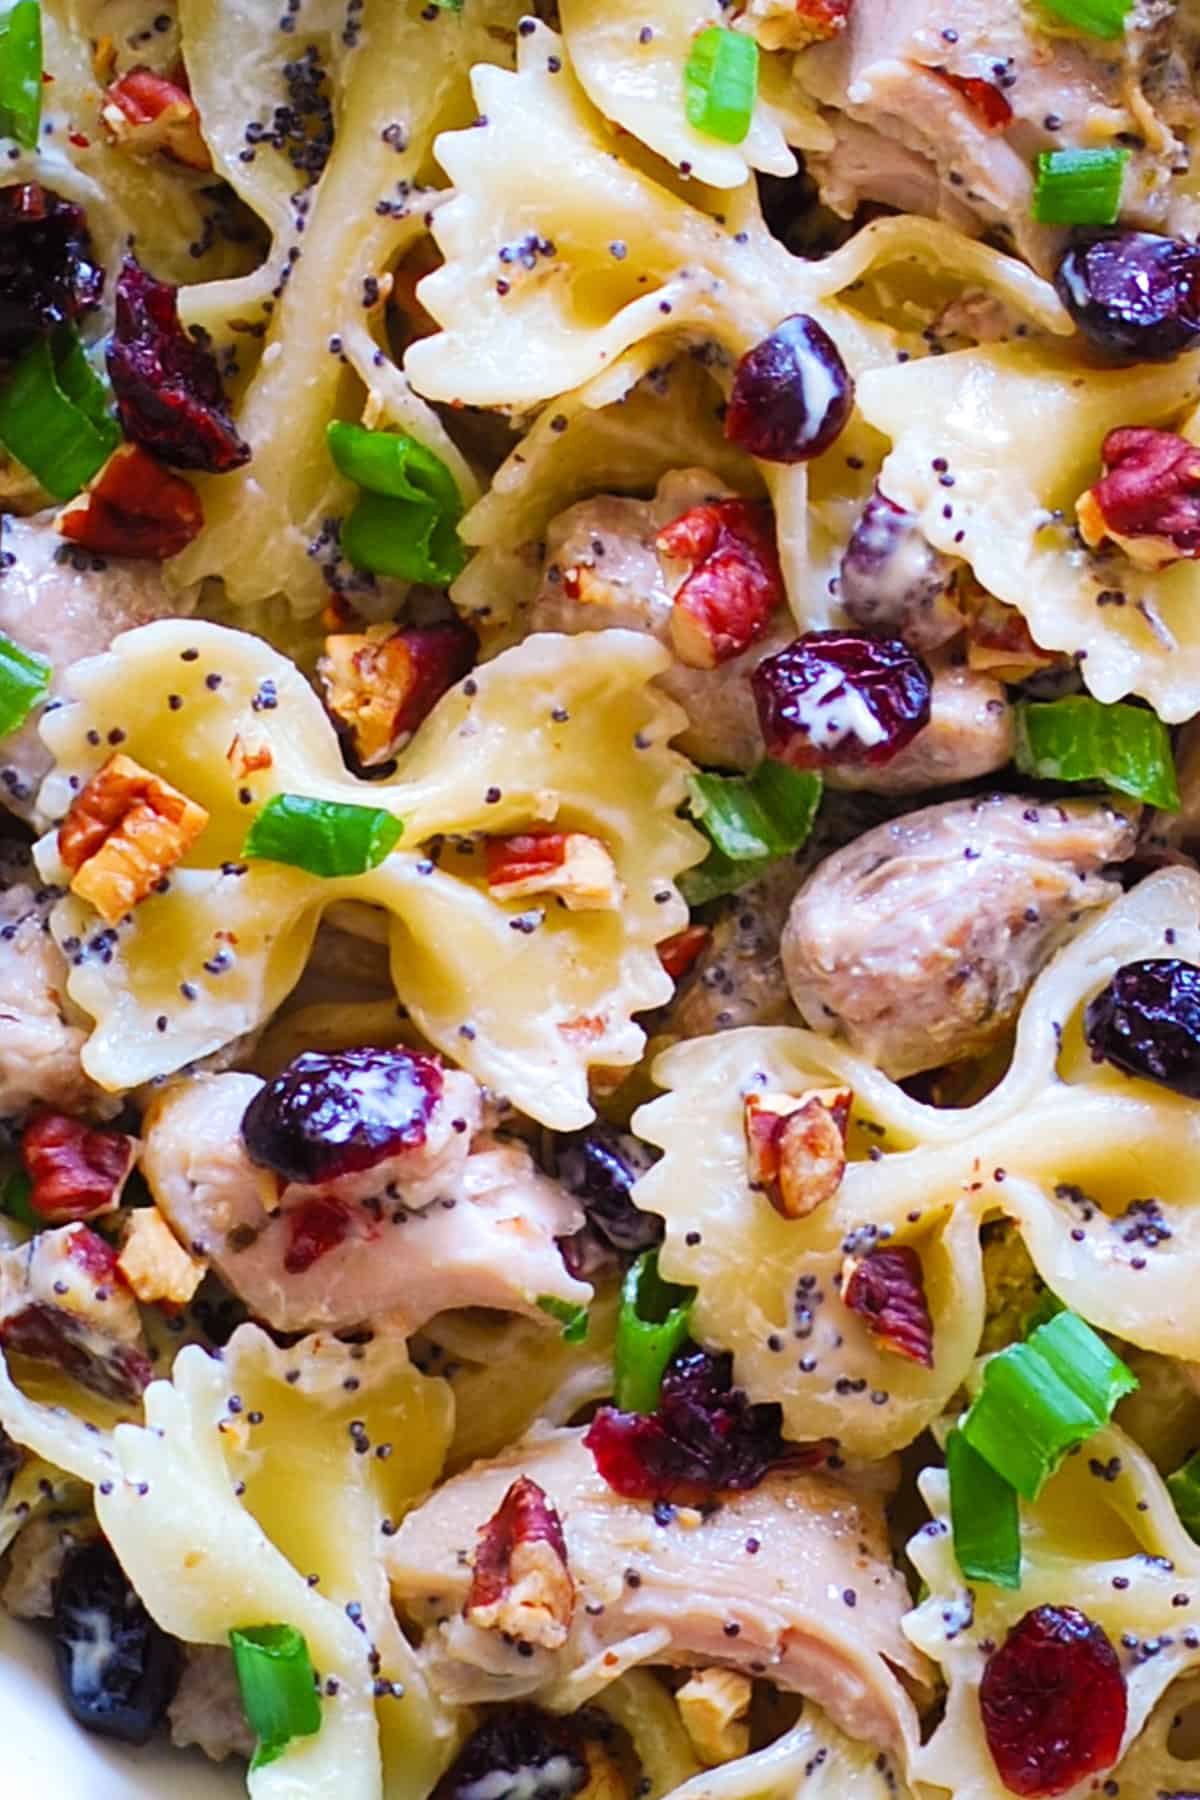 Chicken Pasta Salad with Pecans, Cranberries, and Creamy Poppy Seed Dressing - close-up photo.